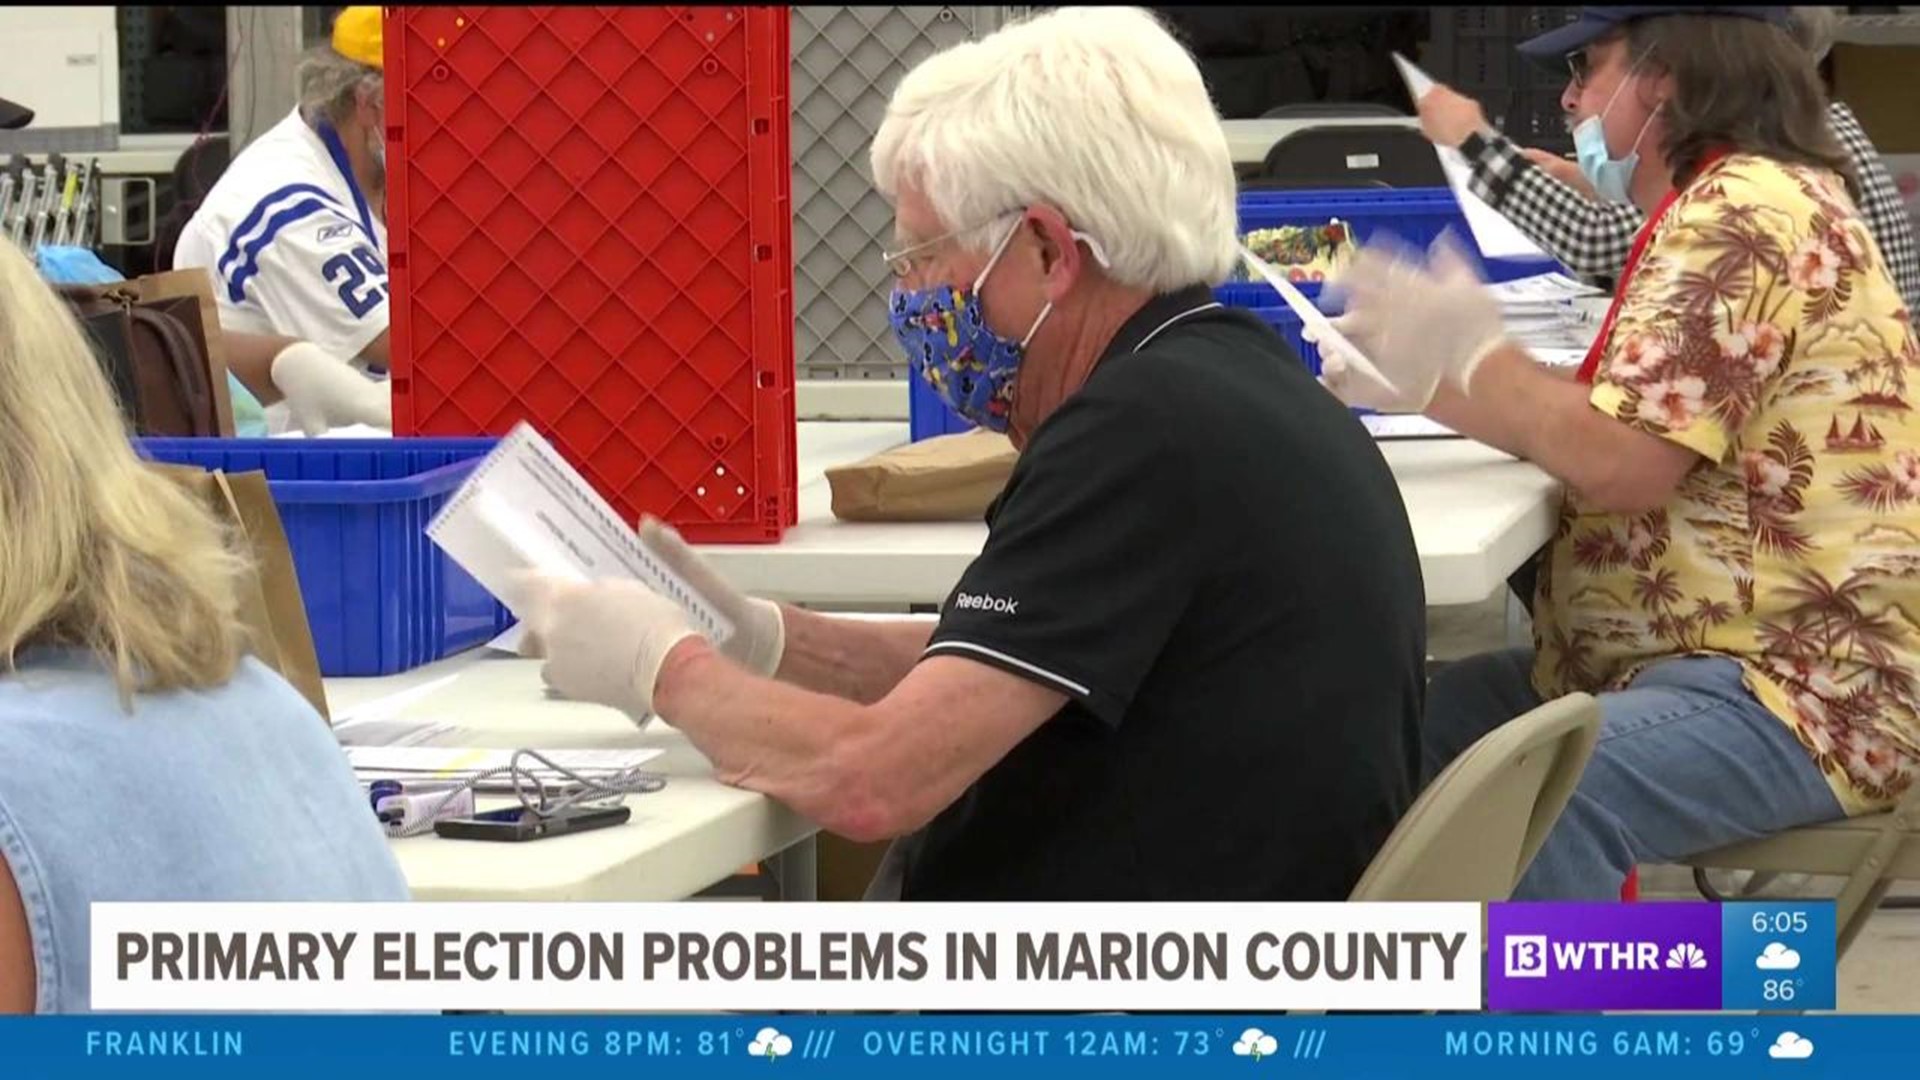 Primary election problems in Marion County